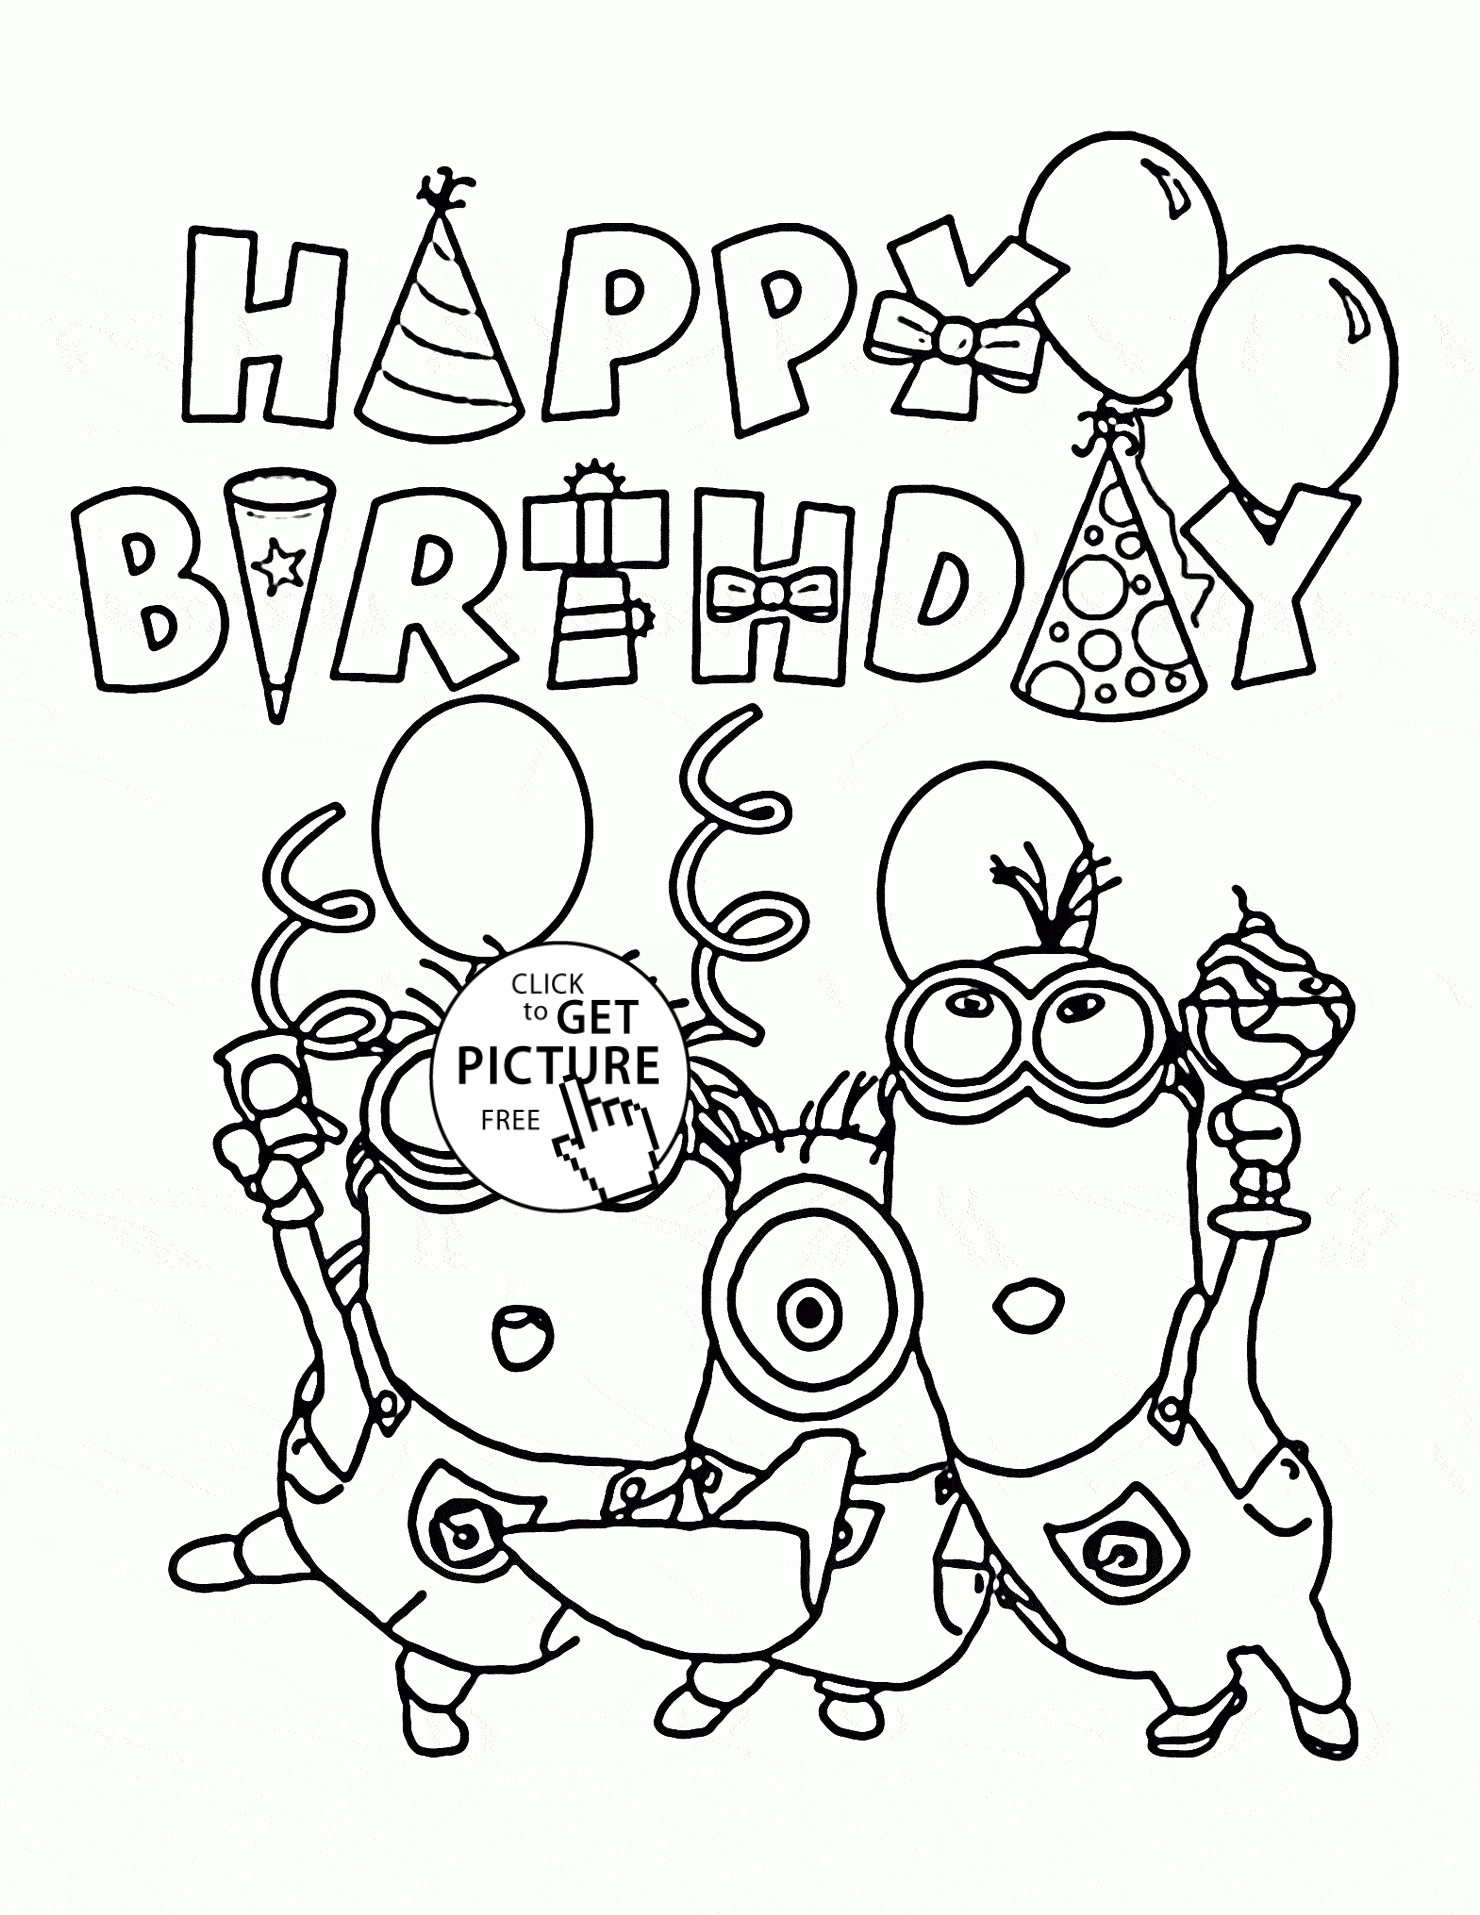 Happy Birthday From Minions Coloring Page For Kids Holiday Coloring Pages Printables